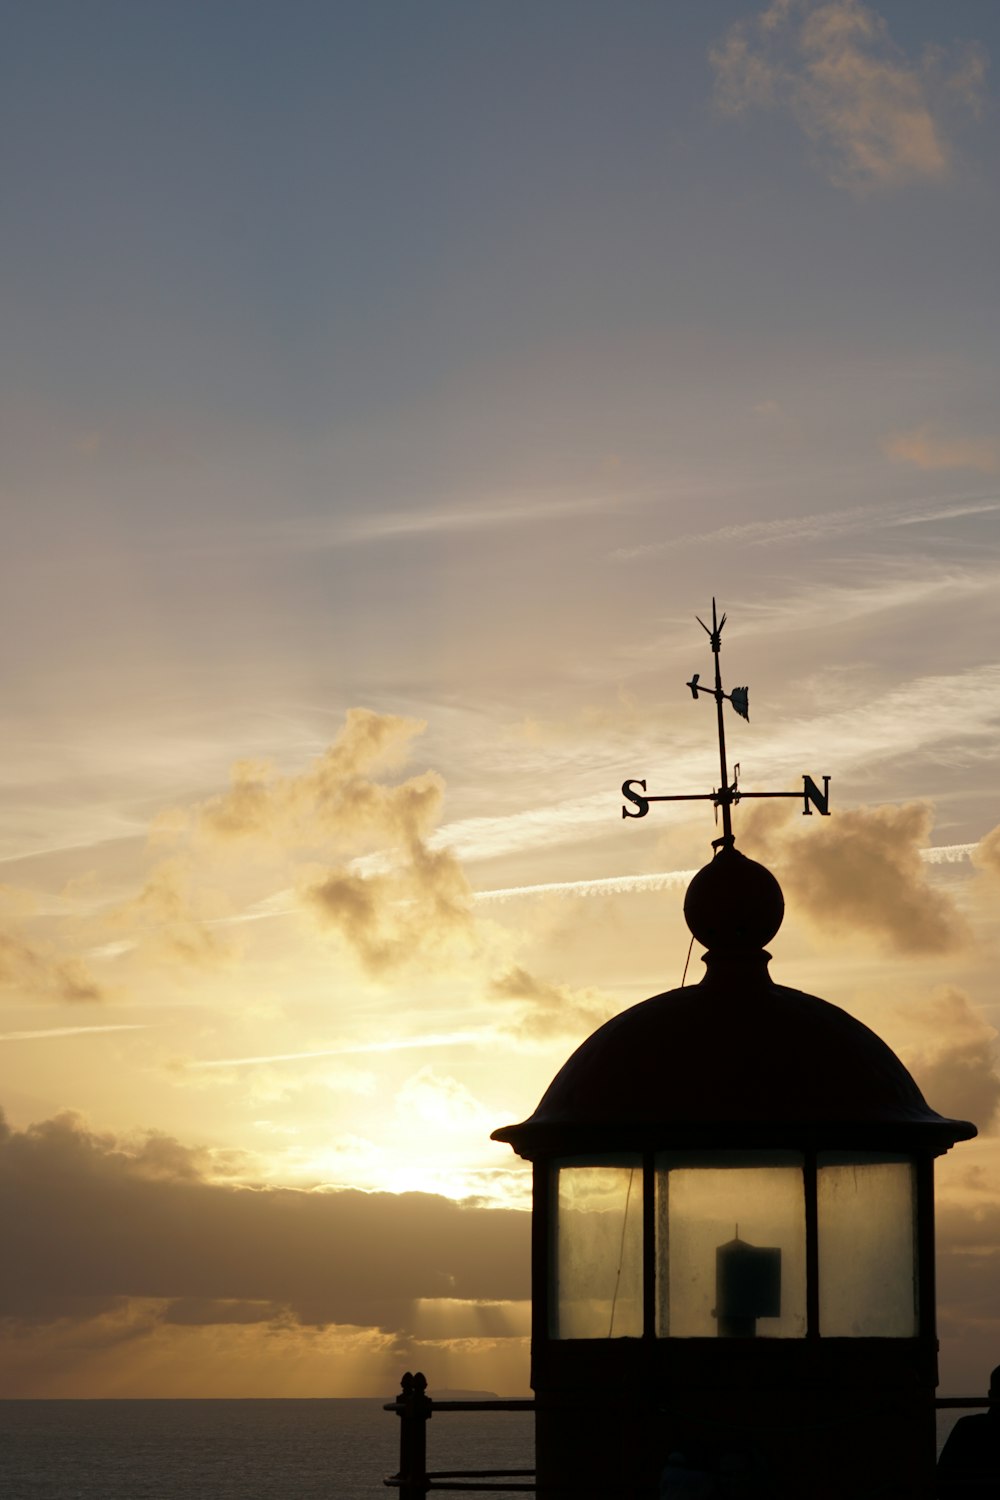 the sun is setting behind a building with a weather vane